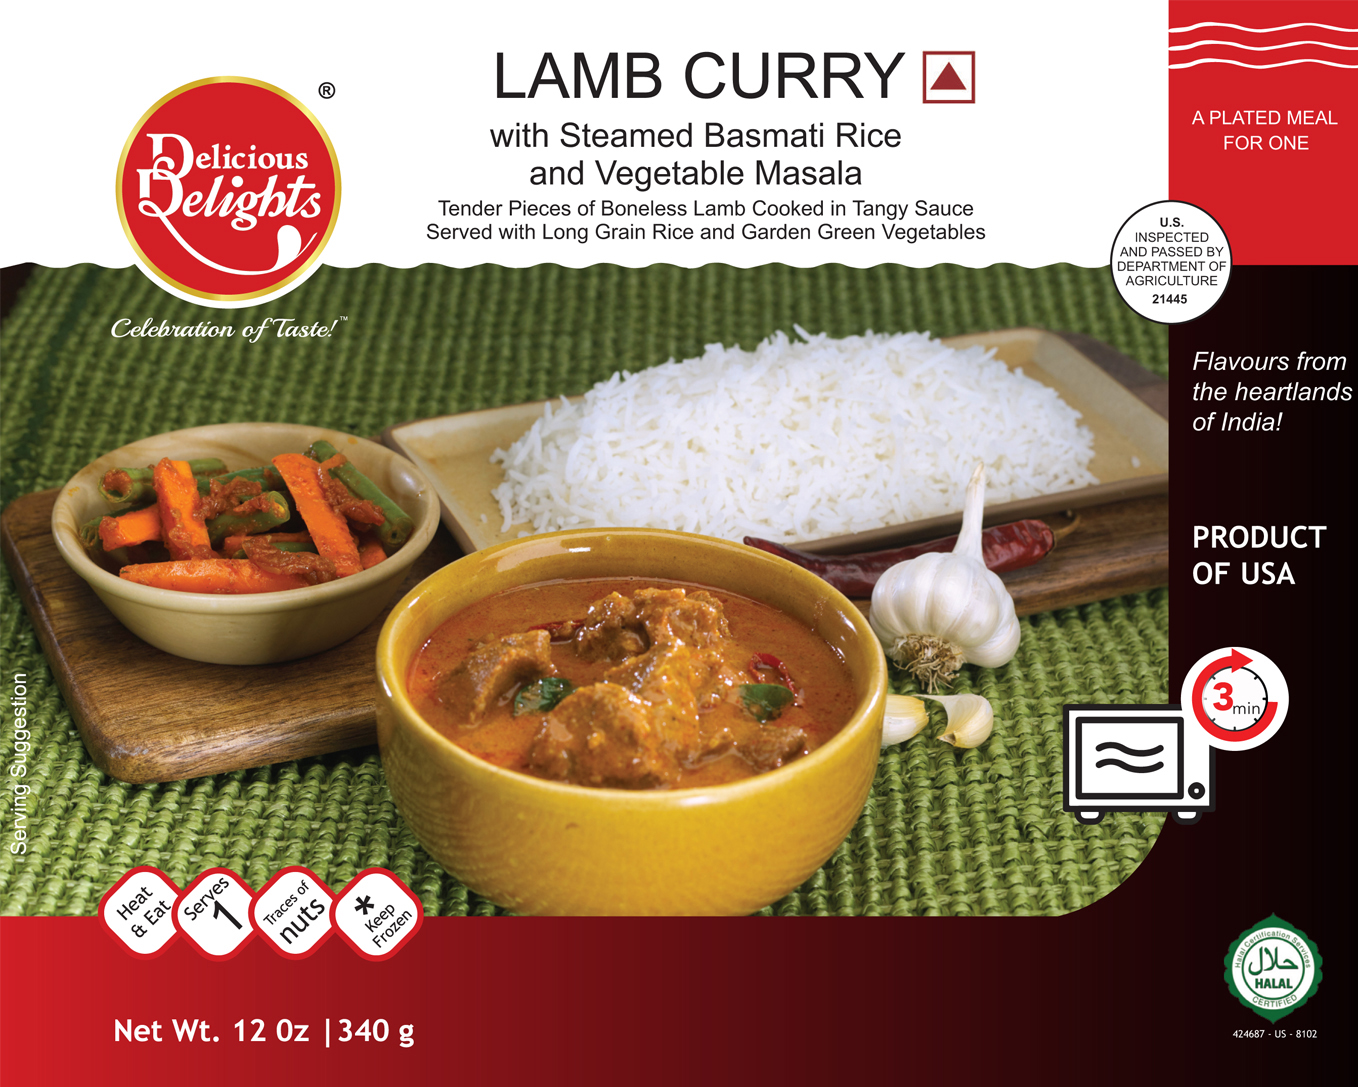 Delicious Delights Lamb Curry with Steamed Basmati Rice and Vegetable Masala